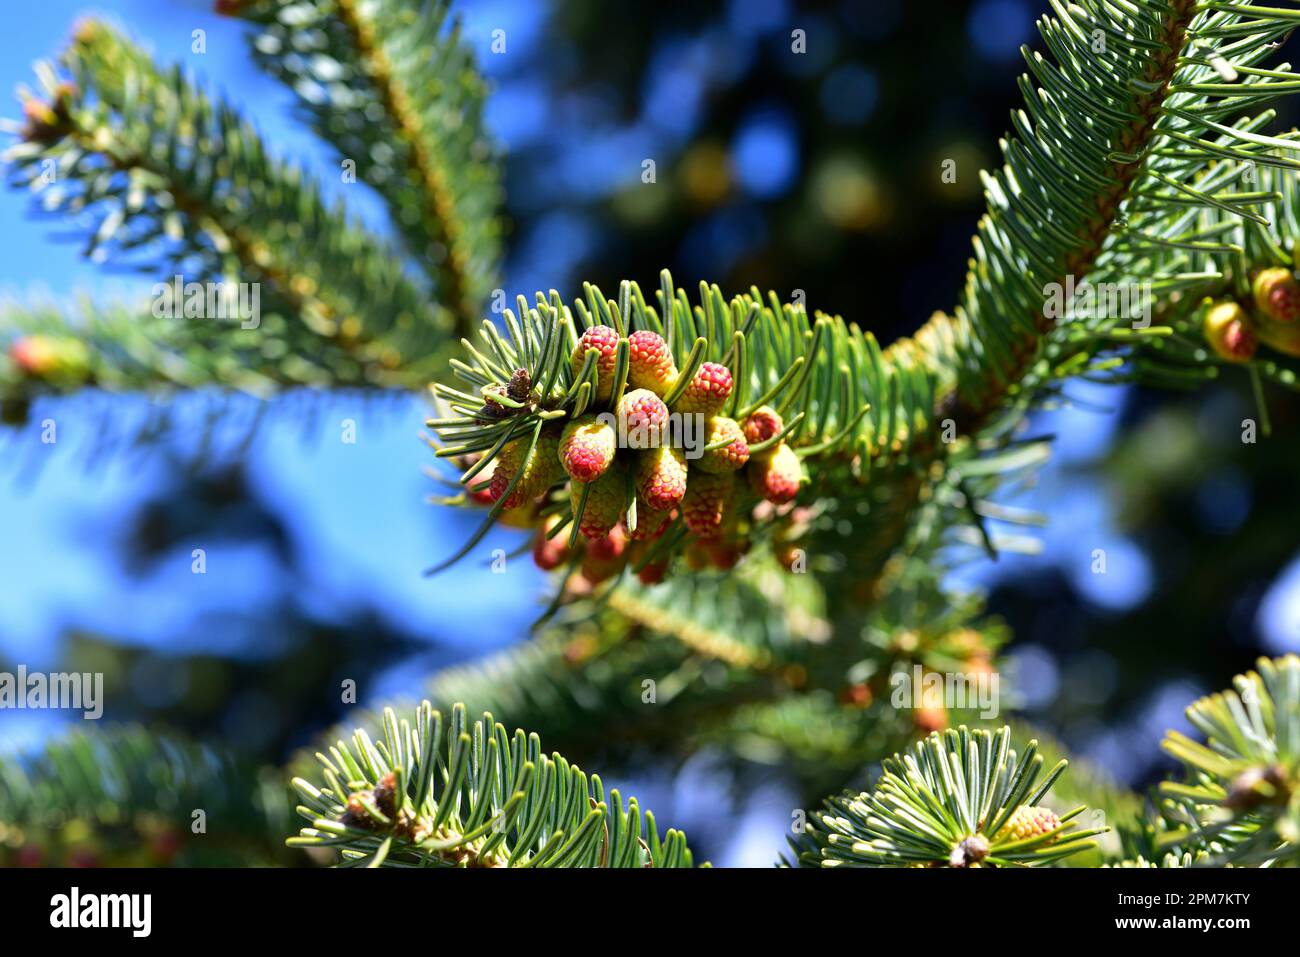 Taurus fir (Abies cilicica) is an evergreen tree native to Turkey, Lebanon and Syria. Male flowers and leaves detail. Stock Photo